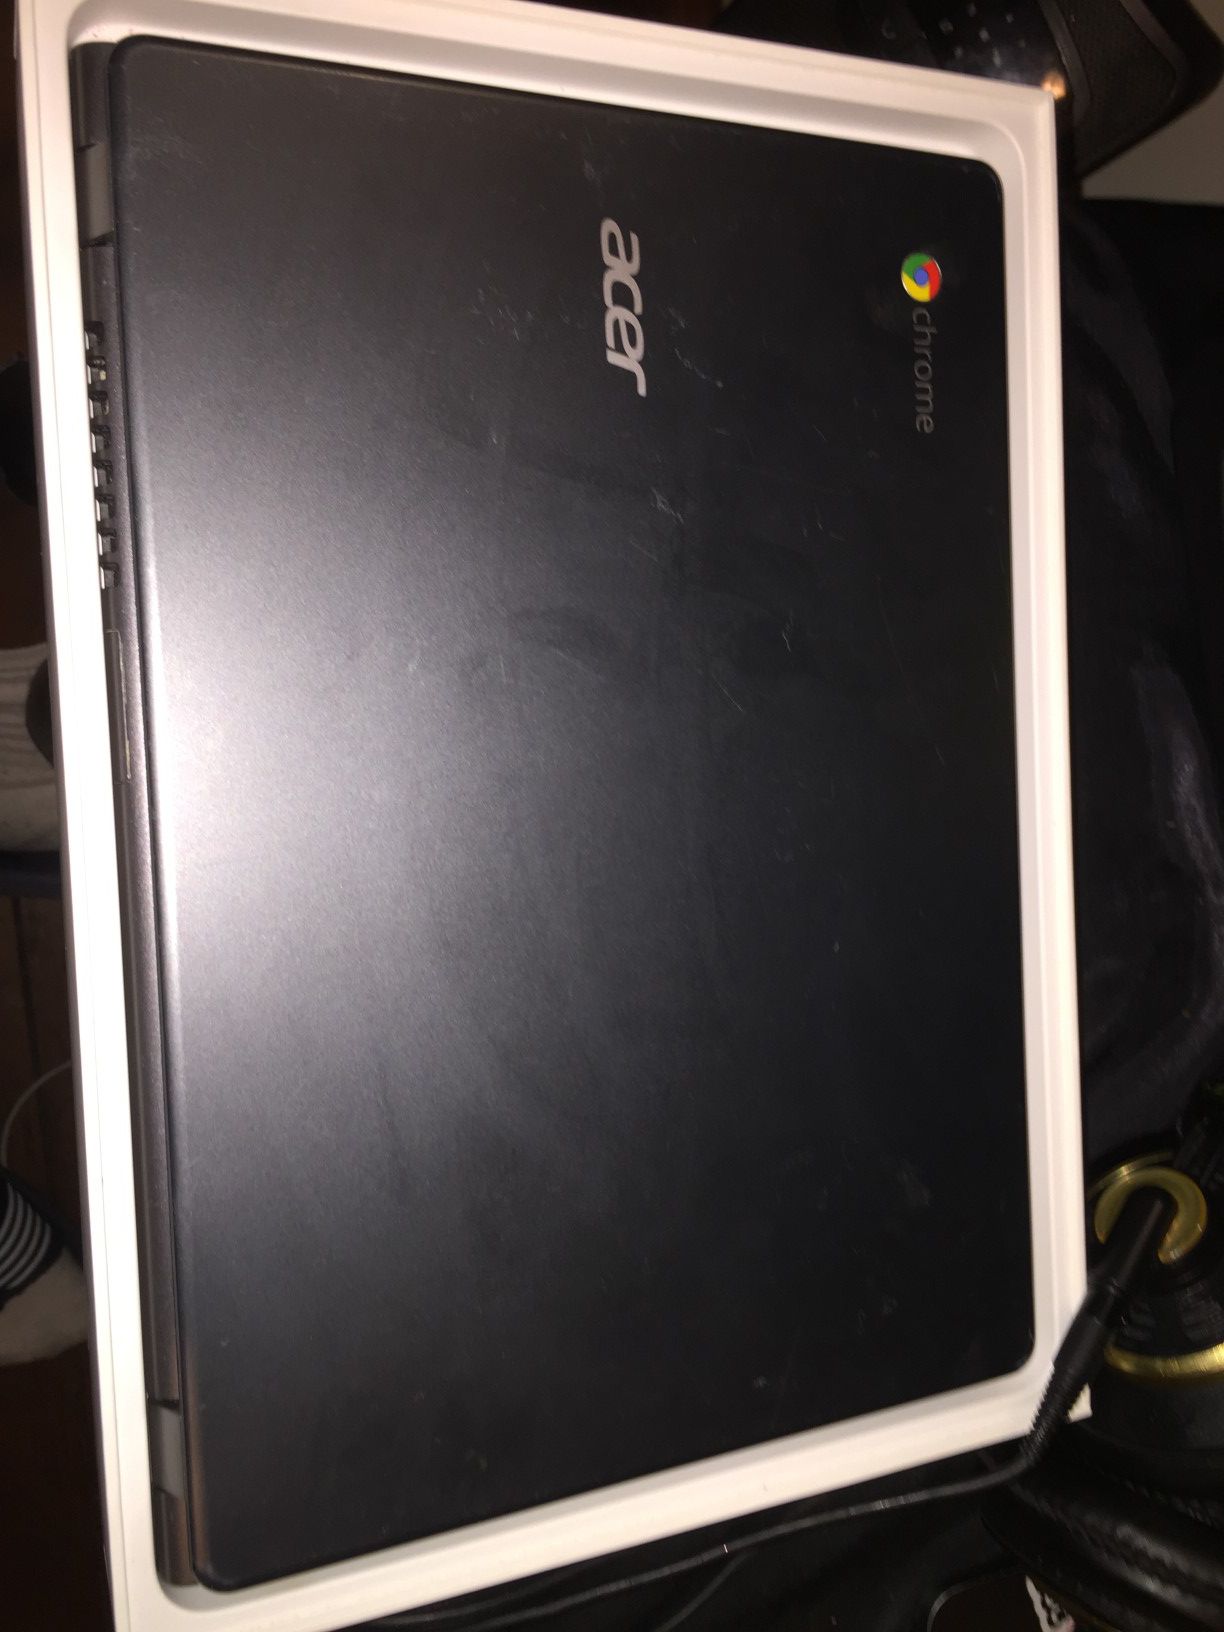 Acer C270 Chromebook. It works like new but i have no charger. Im selling it for 100$. Open for bargains